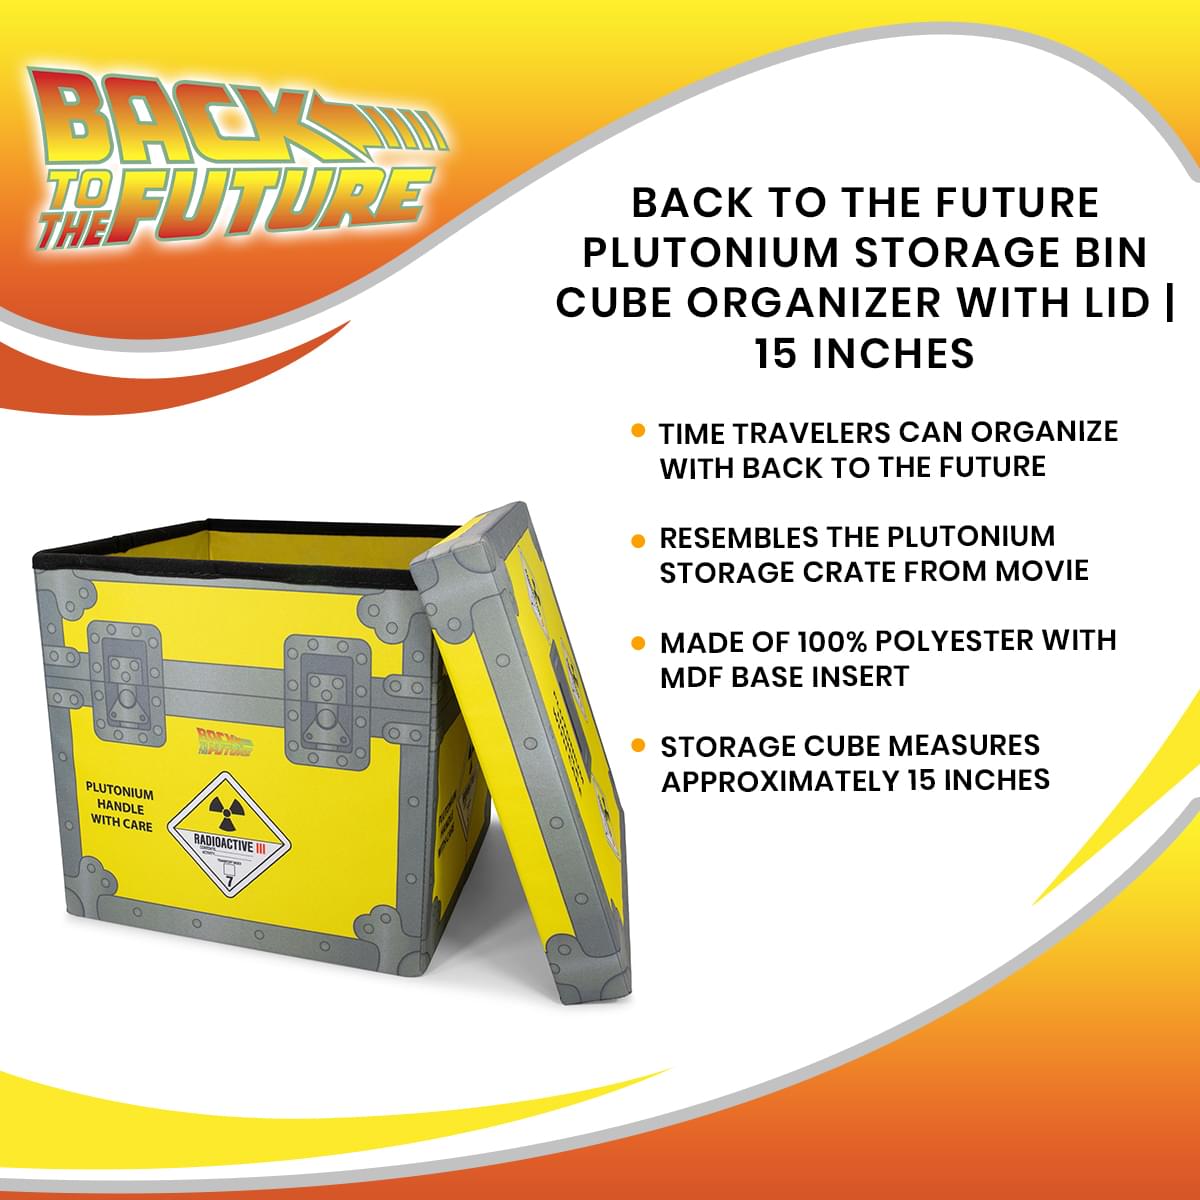 Back to the Future Plutonium Storage Bin Cube Organizer with Lid | 15 Inches